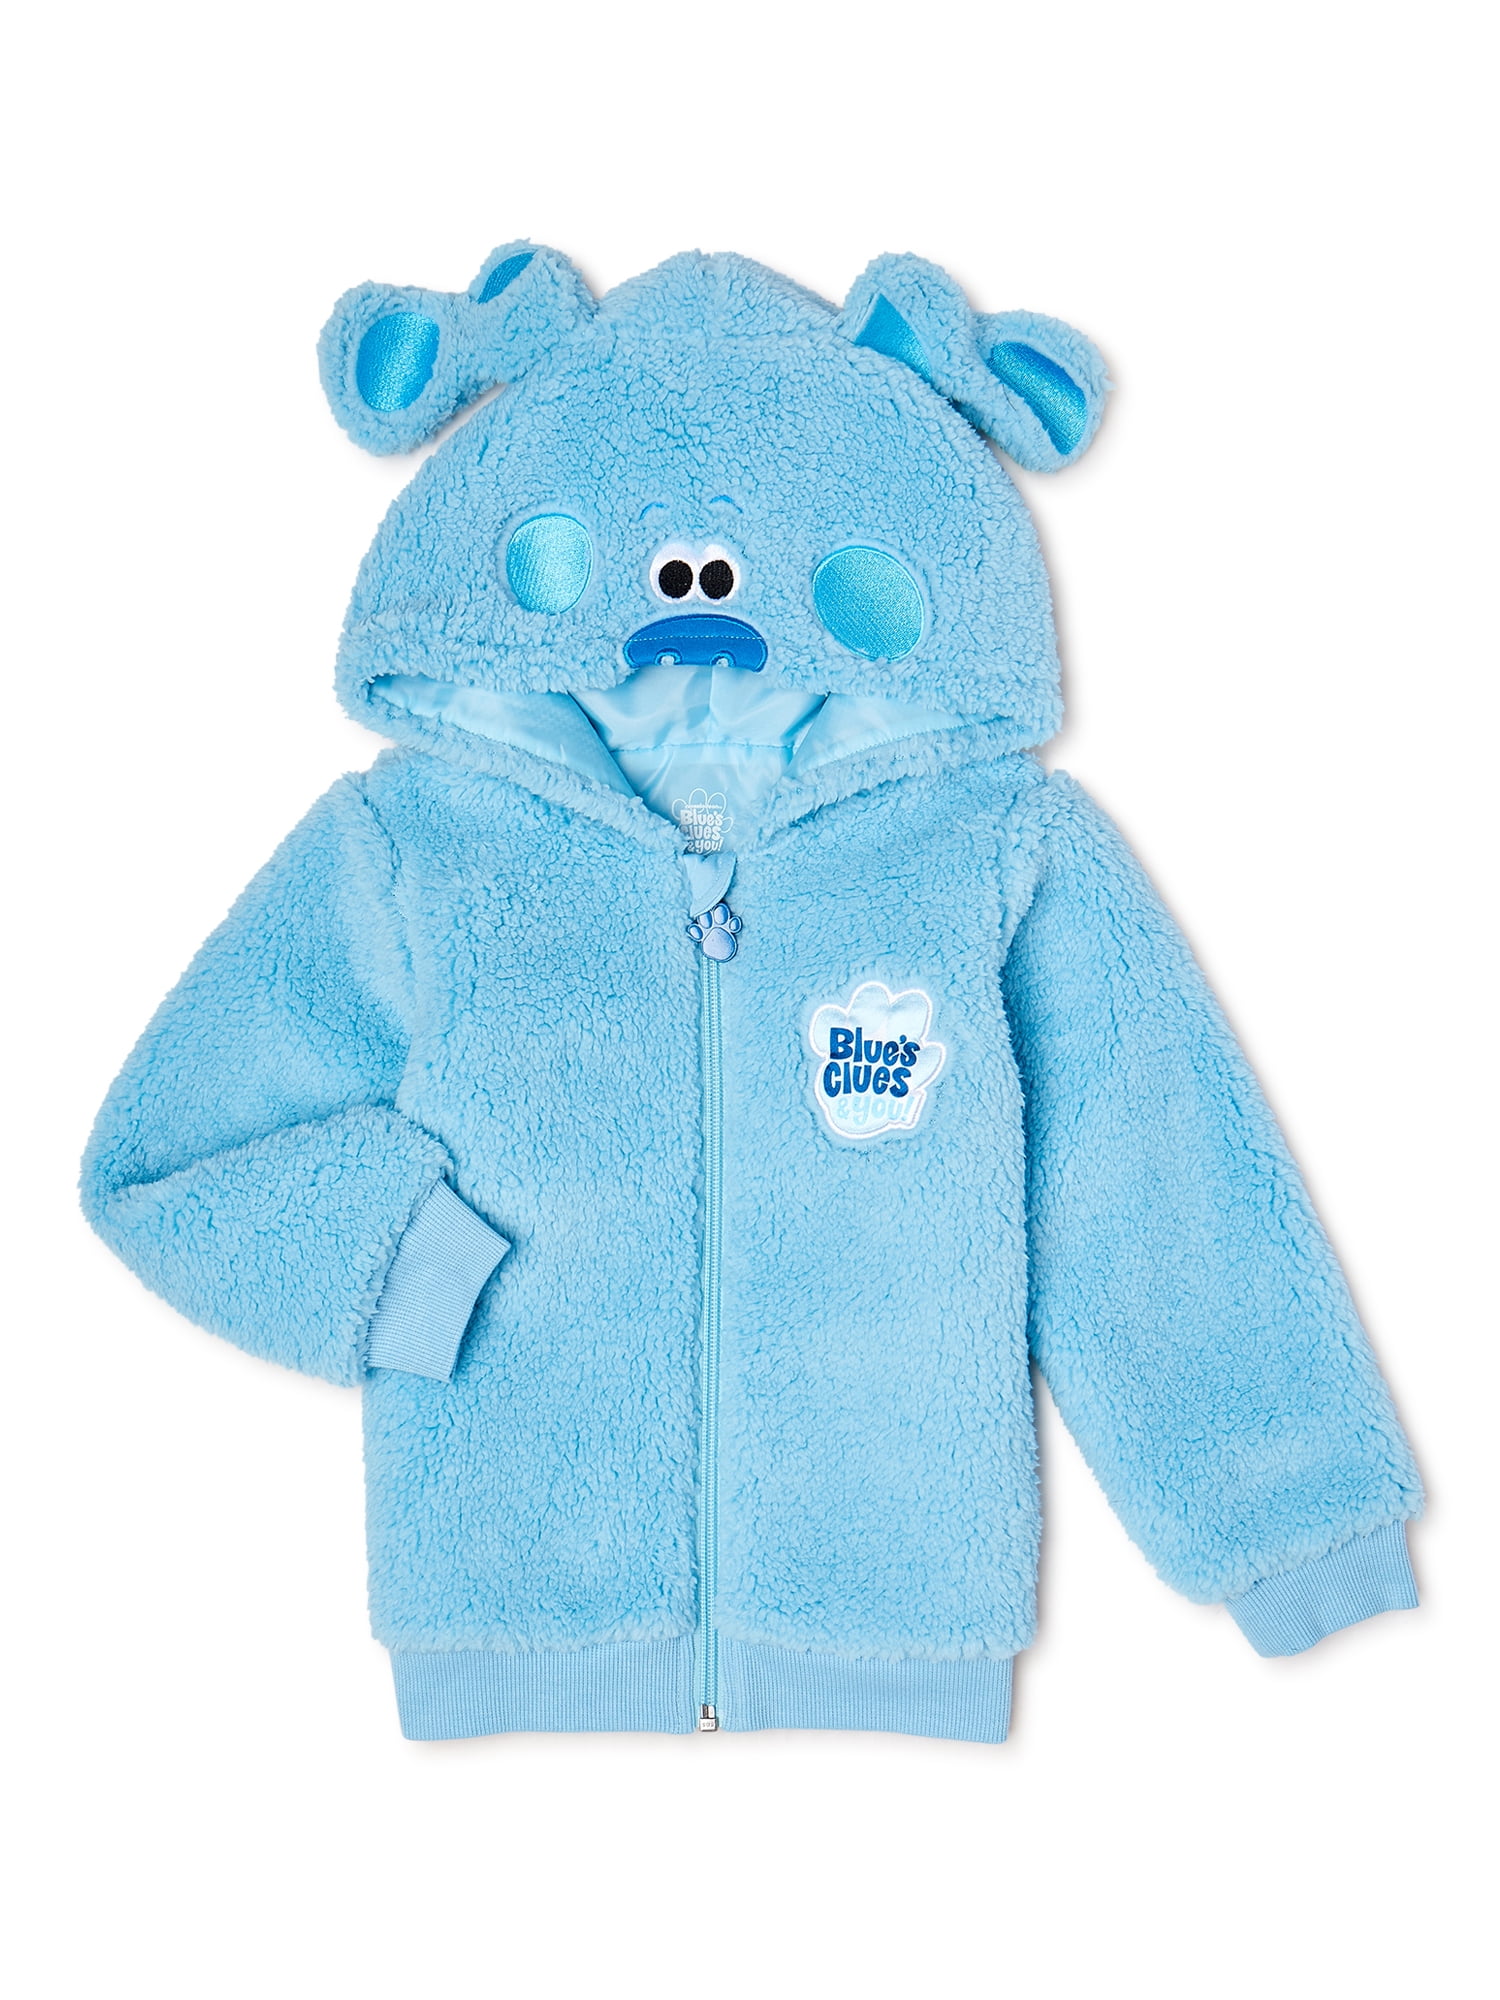 Blues clues hoodie with ears